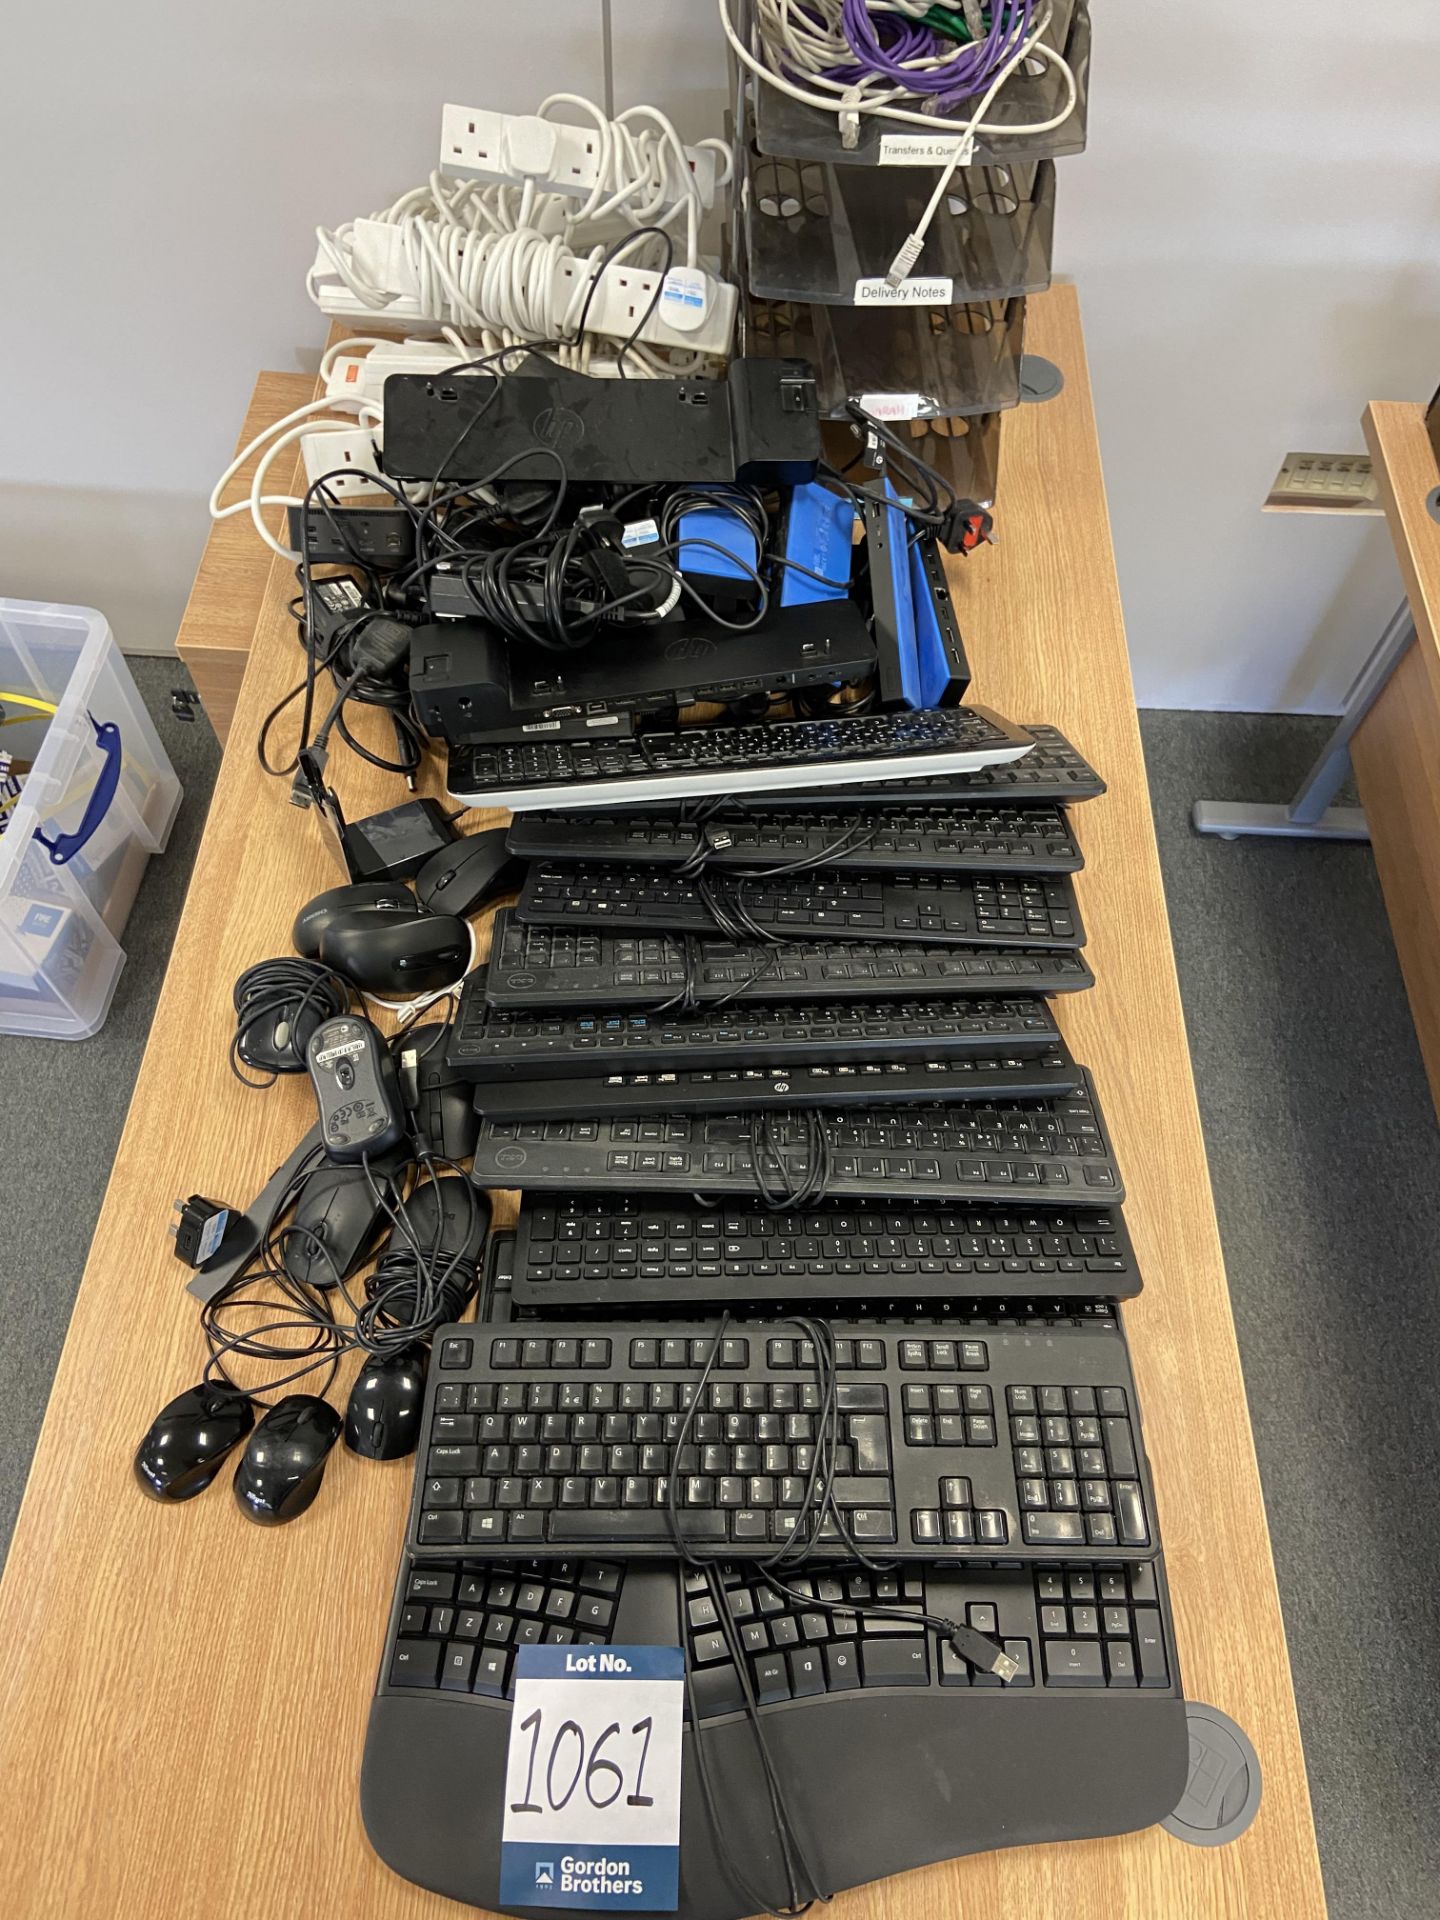 Lot comprisng: Various laptop chargers, phone chargers, docking stations, keyboards, mouses, - Image 2 of 5